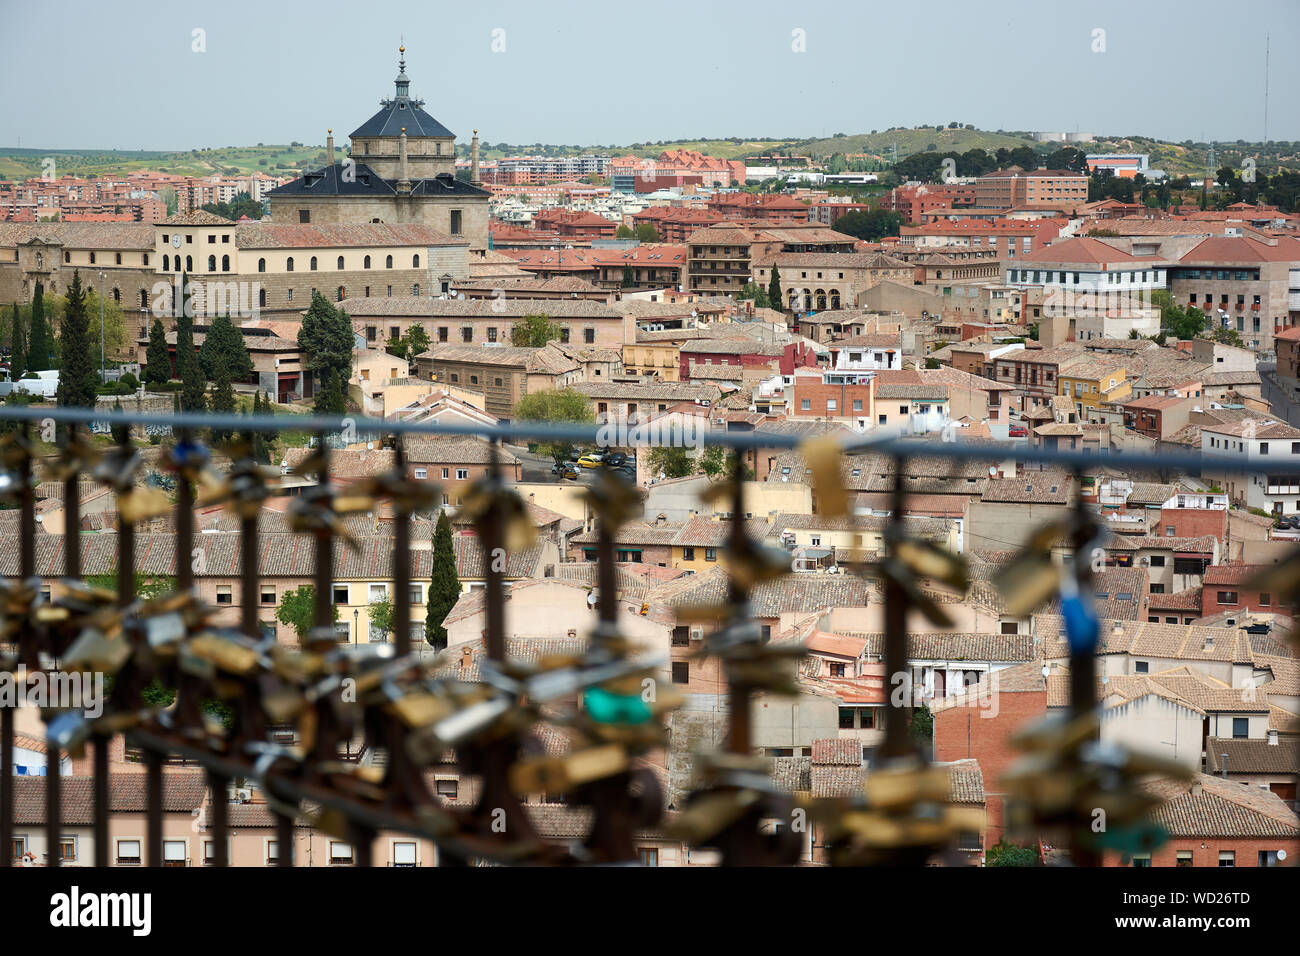 TOLEDO, SPAIN - APRIL 24, 2018: Cityscape in Toledo with view of the Tavera Hospital and locks hooked to a fence by lovers as a proof of eternal love Stock Photo